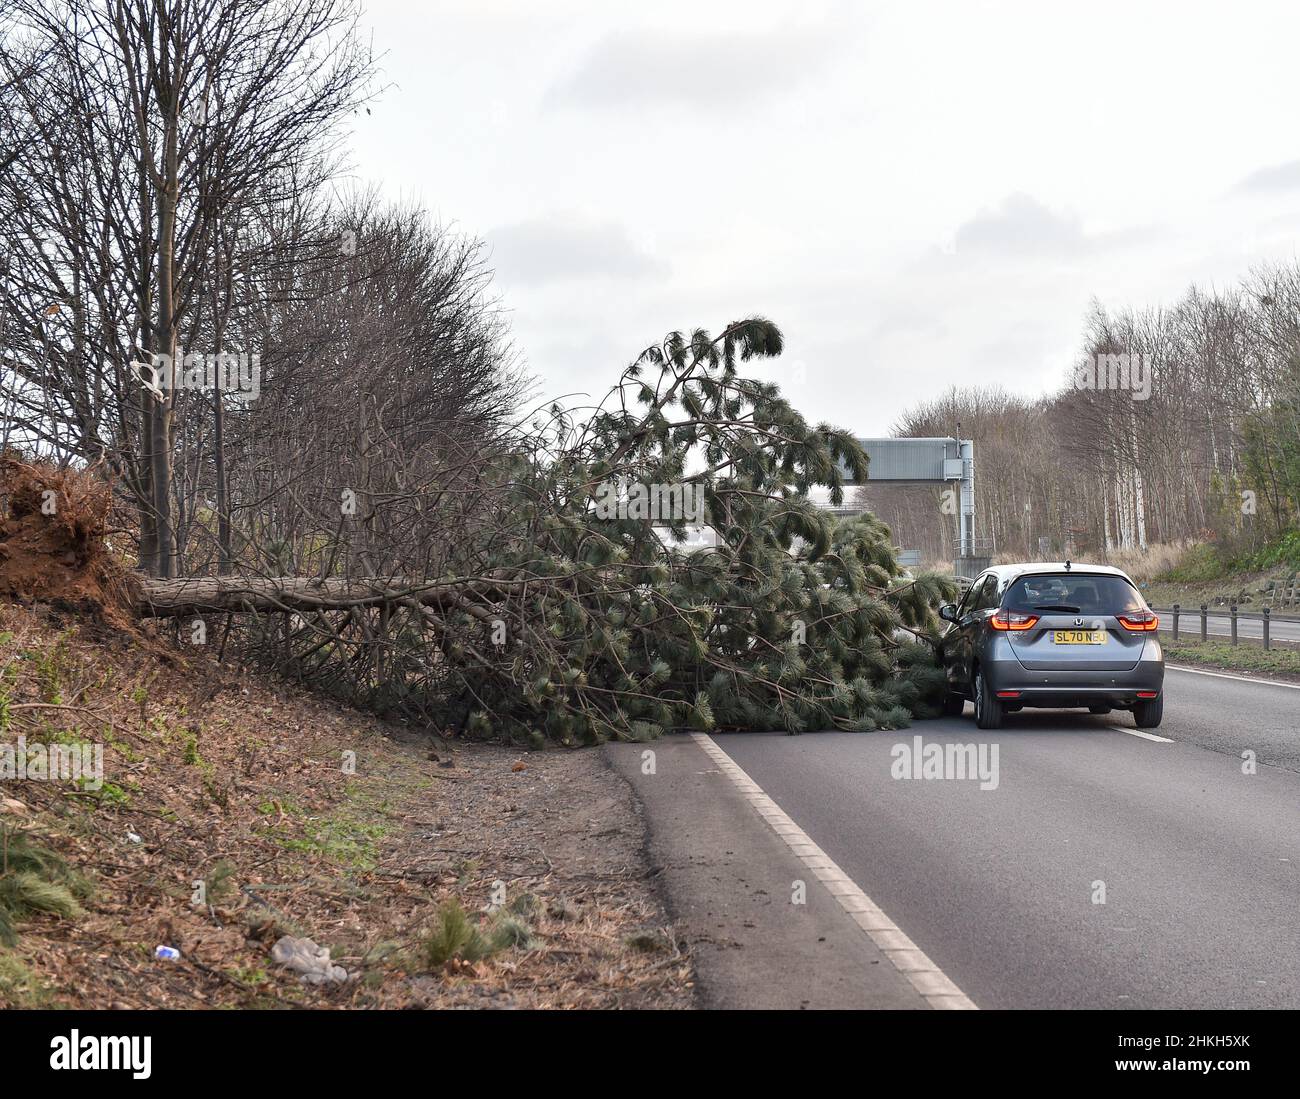 Storm Malik hit the UK, with dog walkers getting caught in sandstorms in Dunbar, East Lothian and drivers narrowly avoiding fallen trees on the main A1 road near Musselburgh, East Lothian. Stock Photo